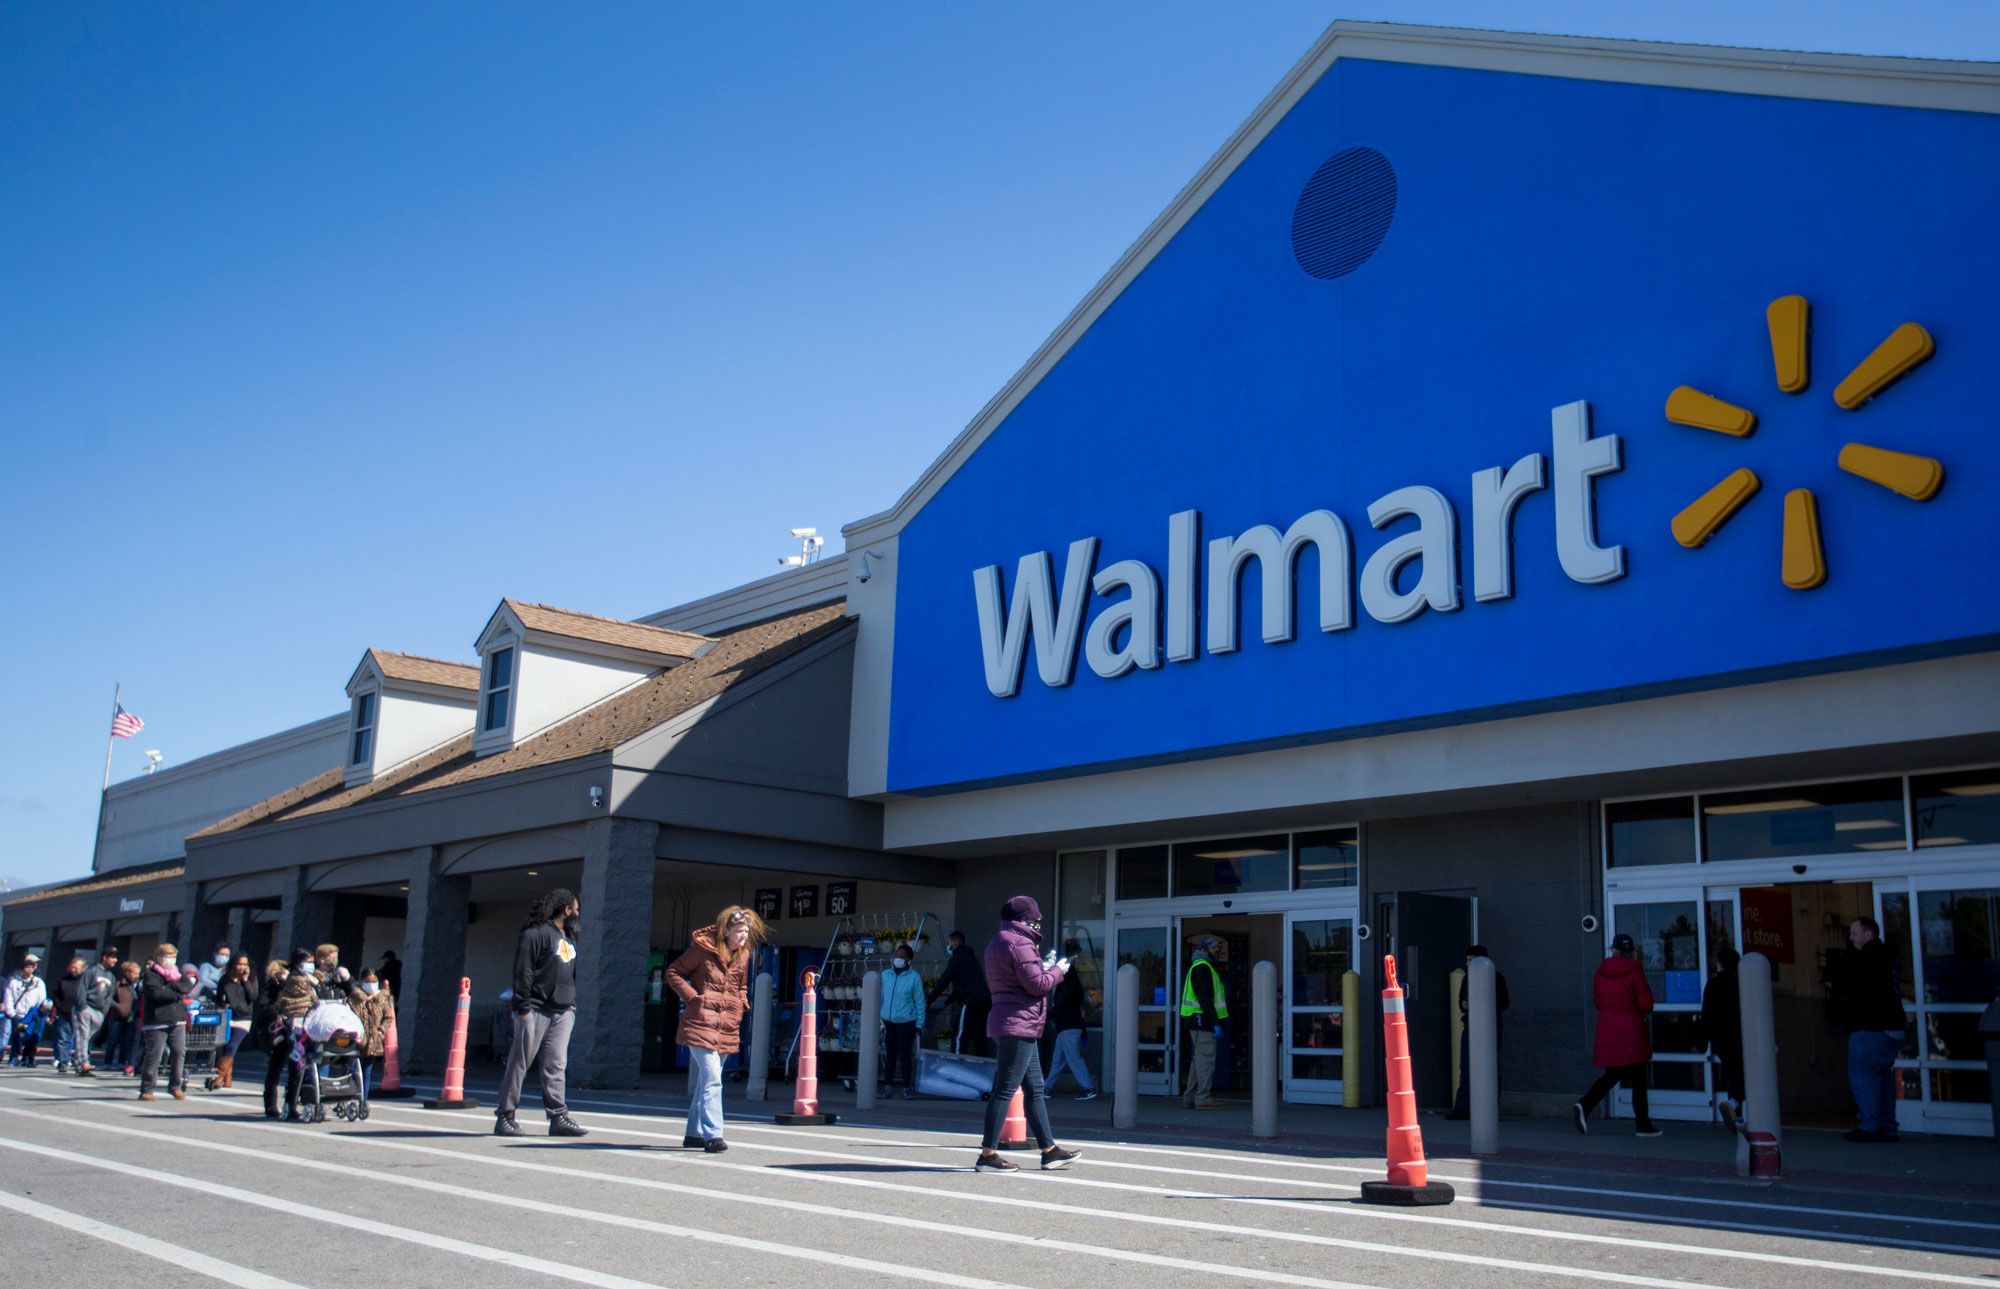 Walmart in Worcester may be ready to reopen Tuesday